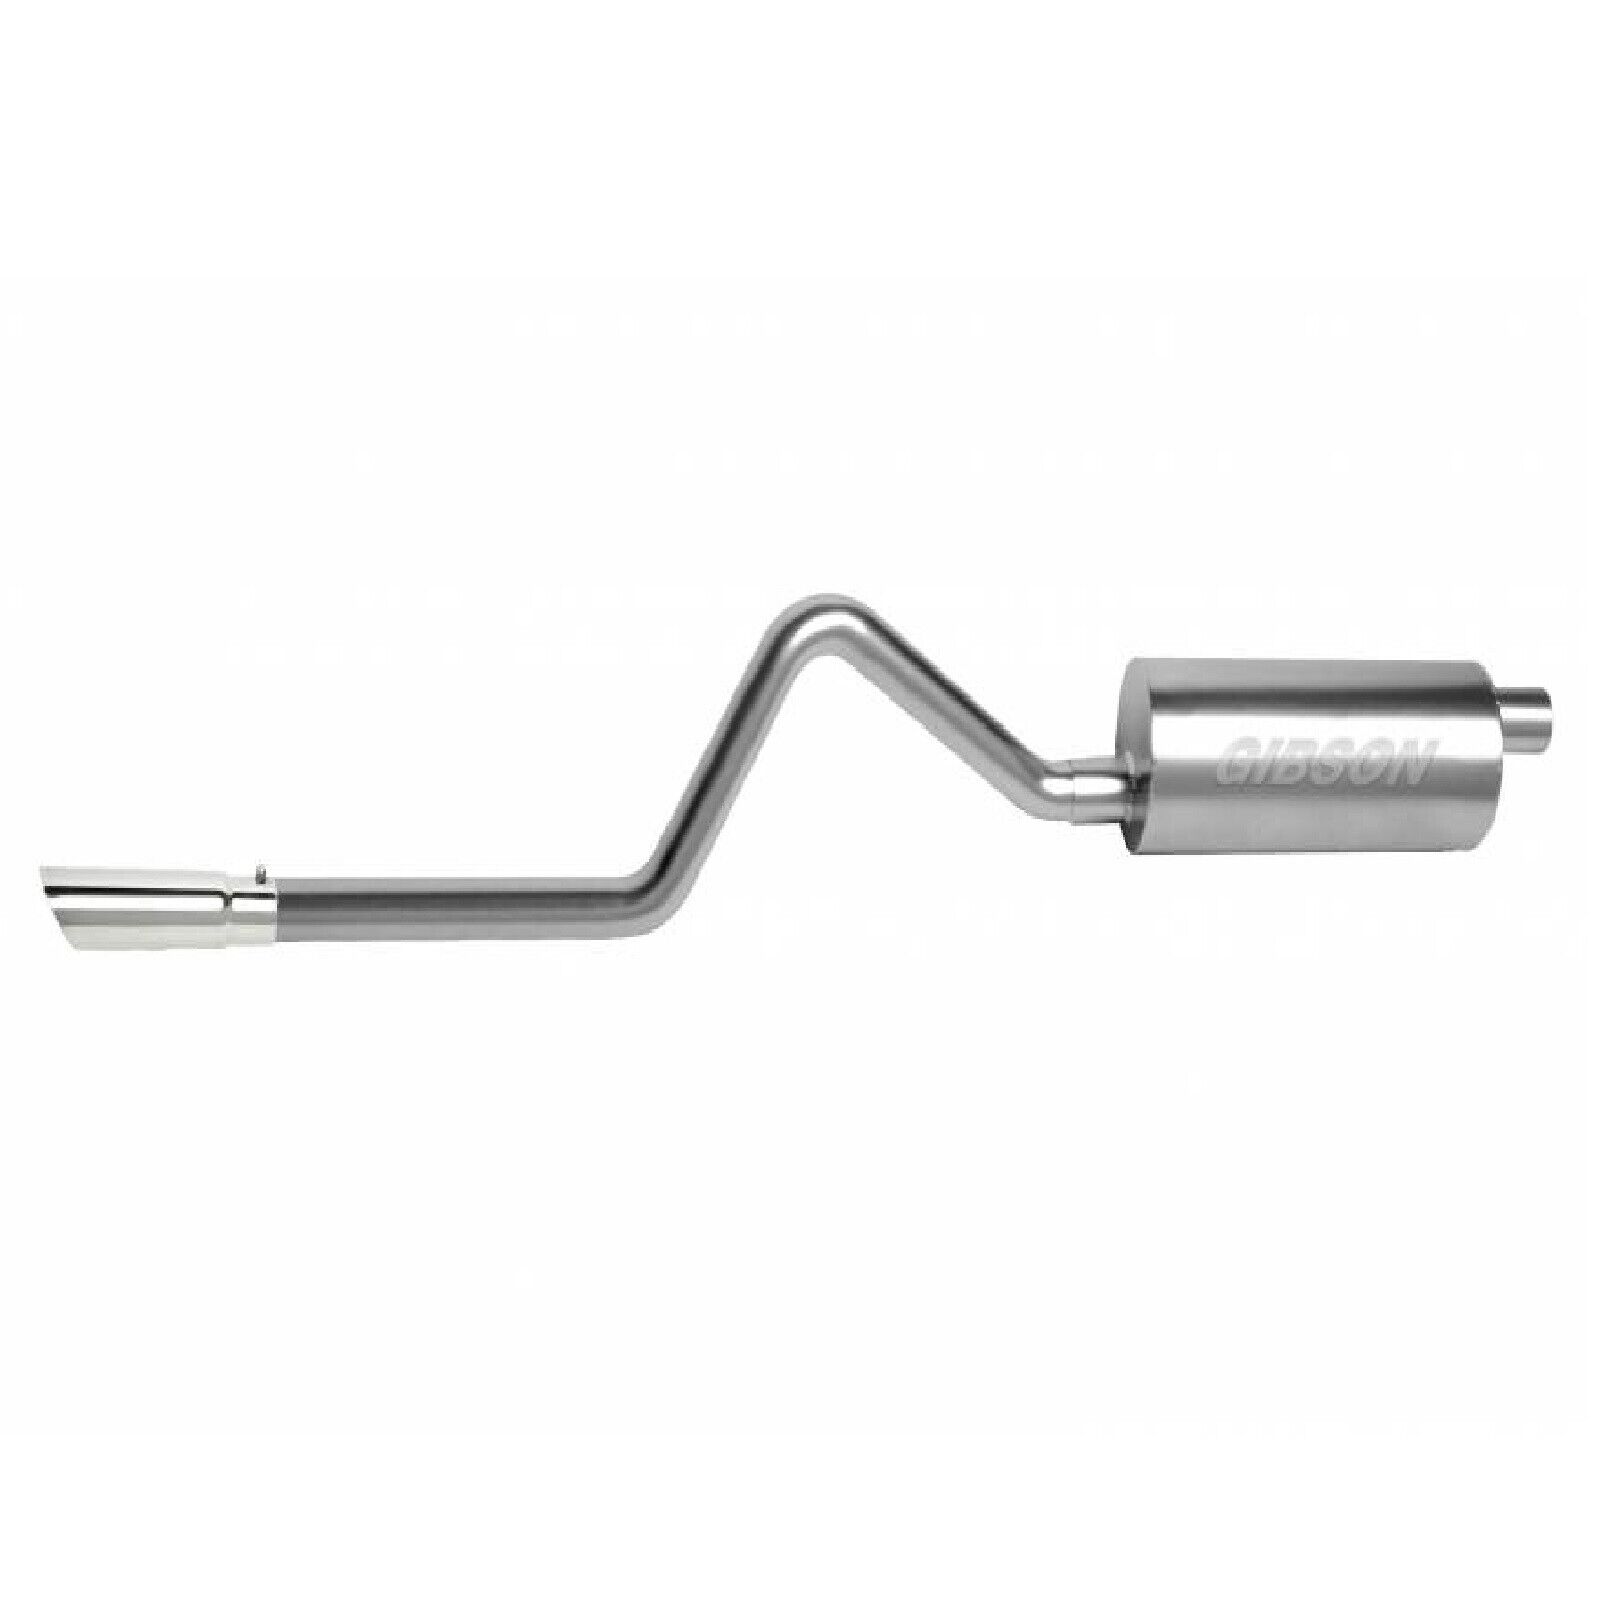 Gibson 18900 Single Aluminized Exhaust System for 01-07 Sequoia Limited/SR5 4.7L